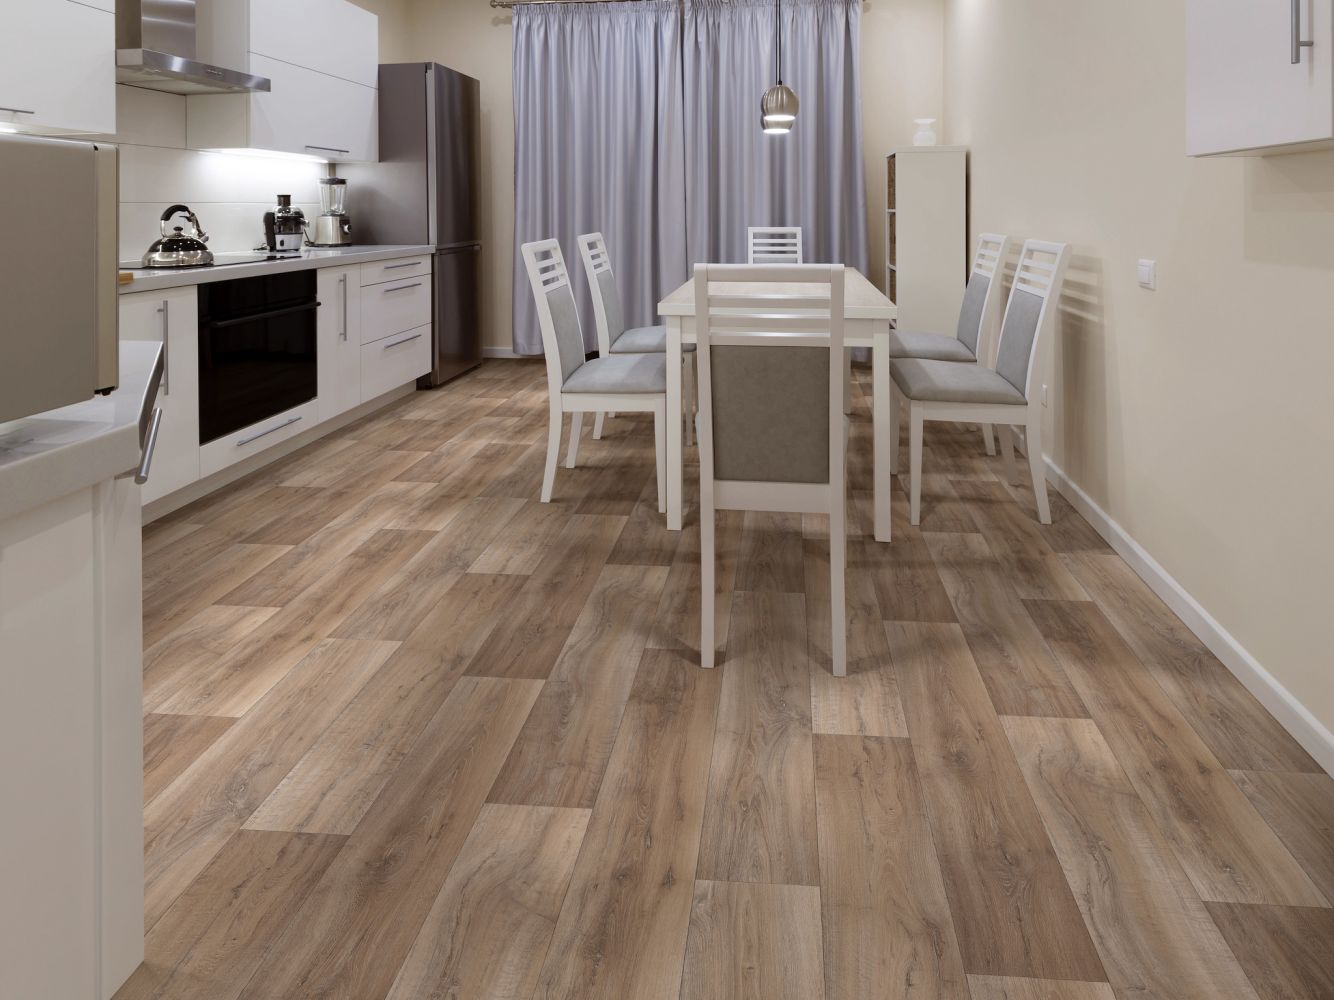 Shaw Builder Flooring Resilient Residential Sublime Vision Pavo 07037_VG090